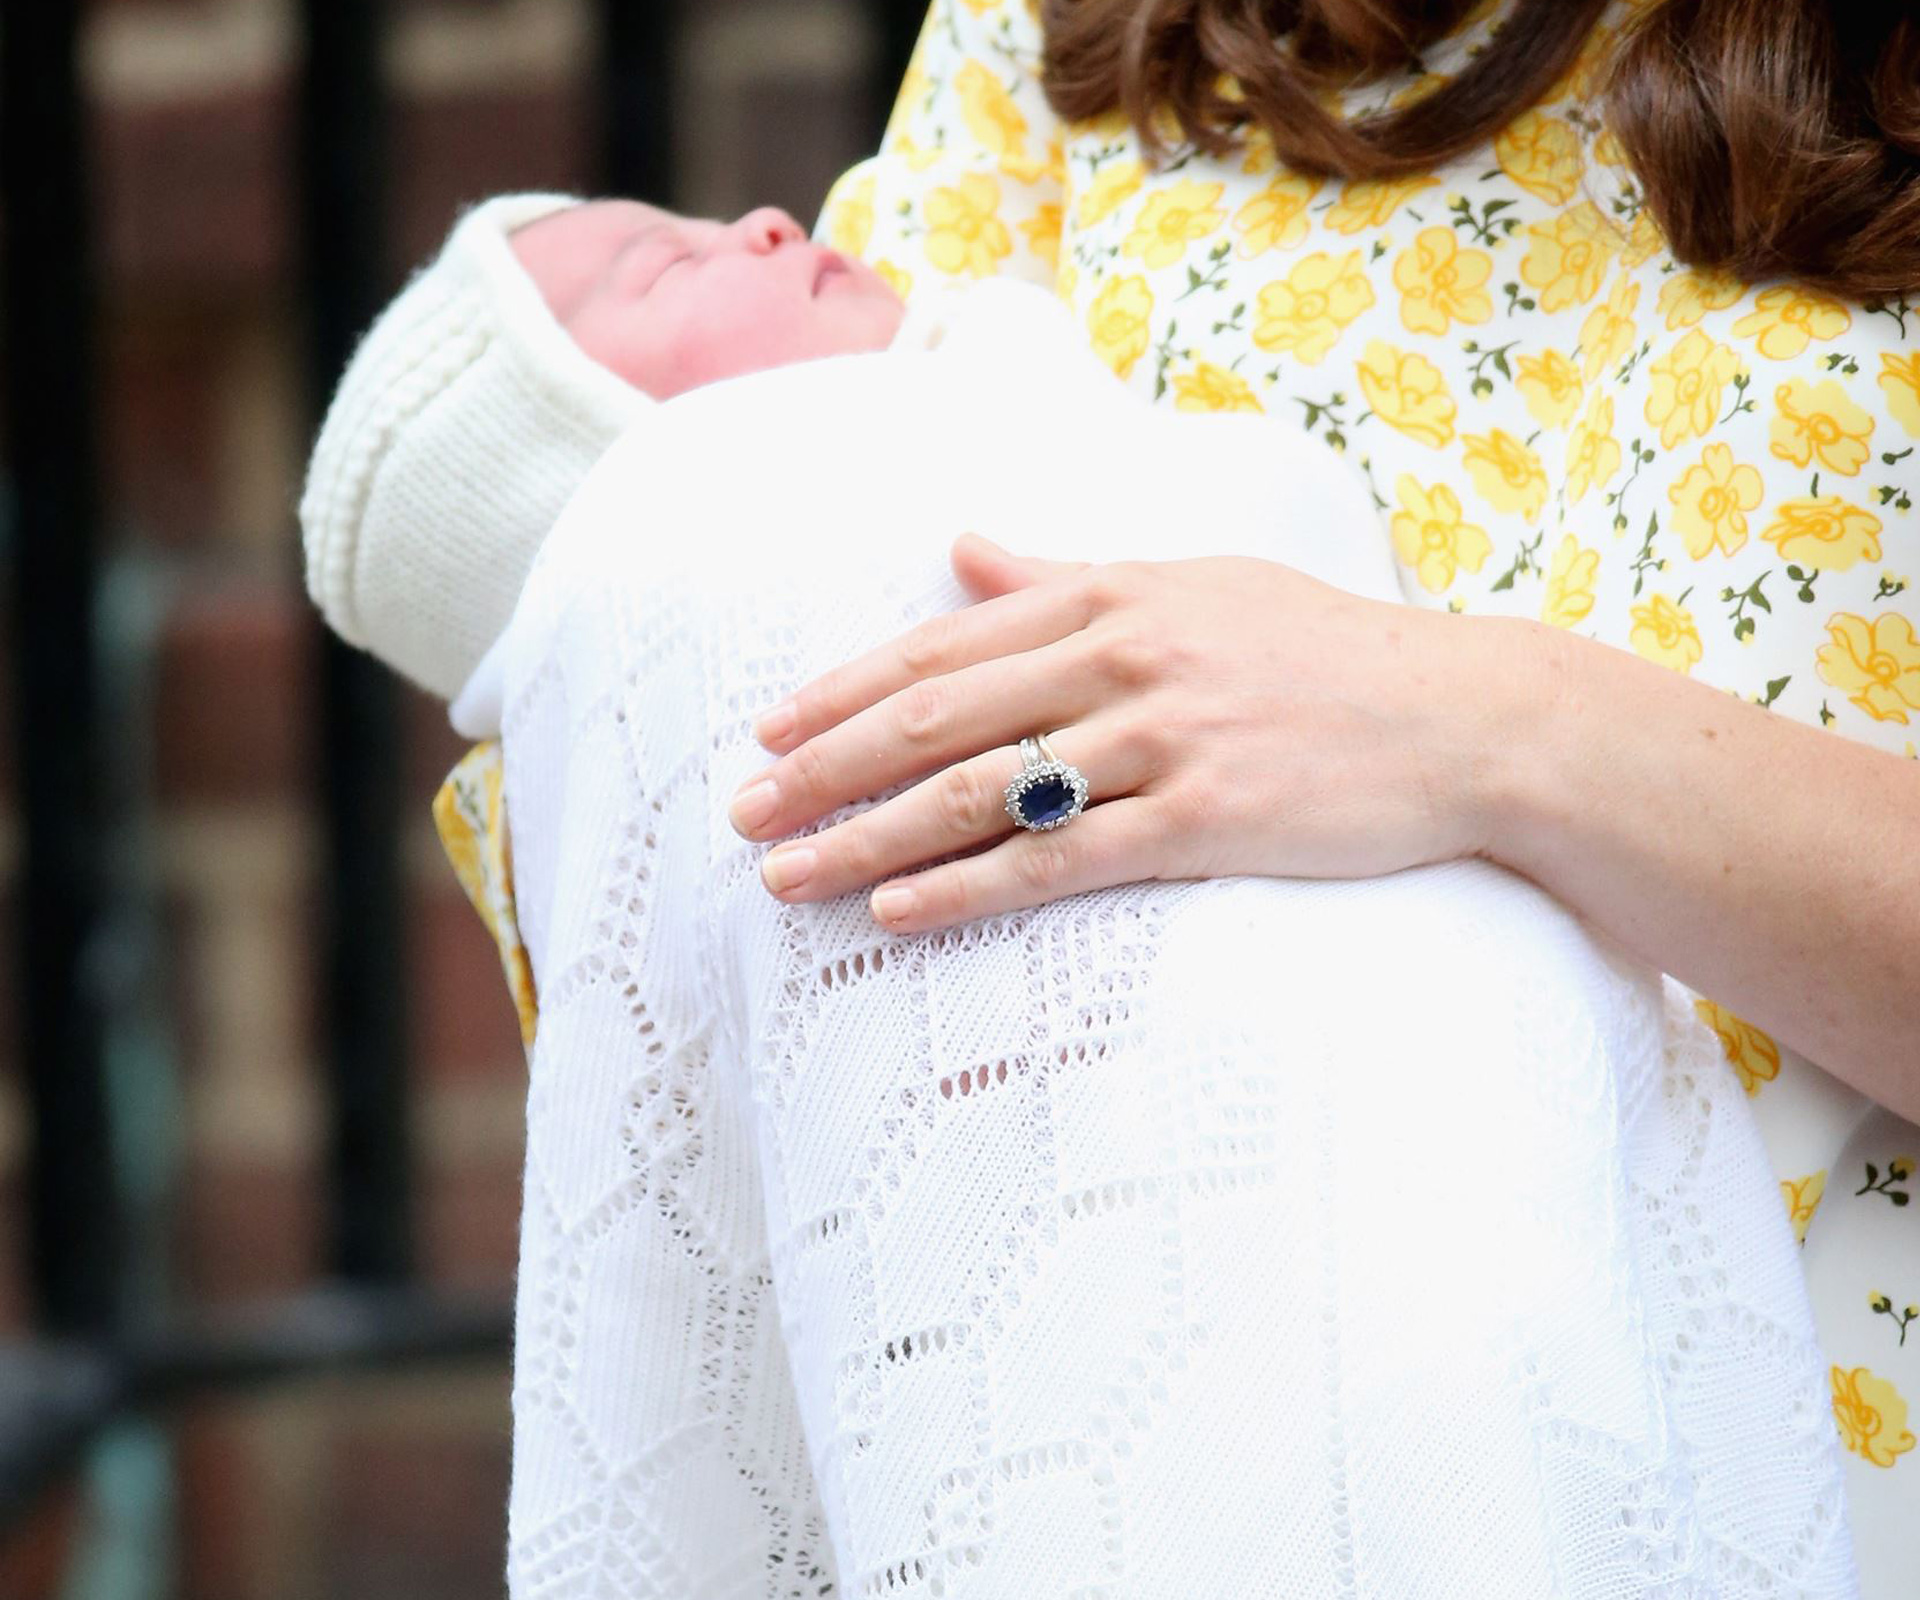 Kate Middleton holding baby Prince George